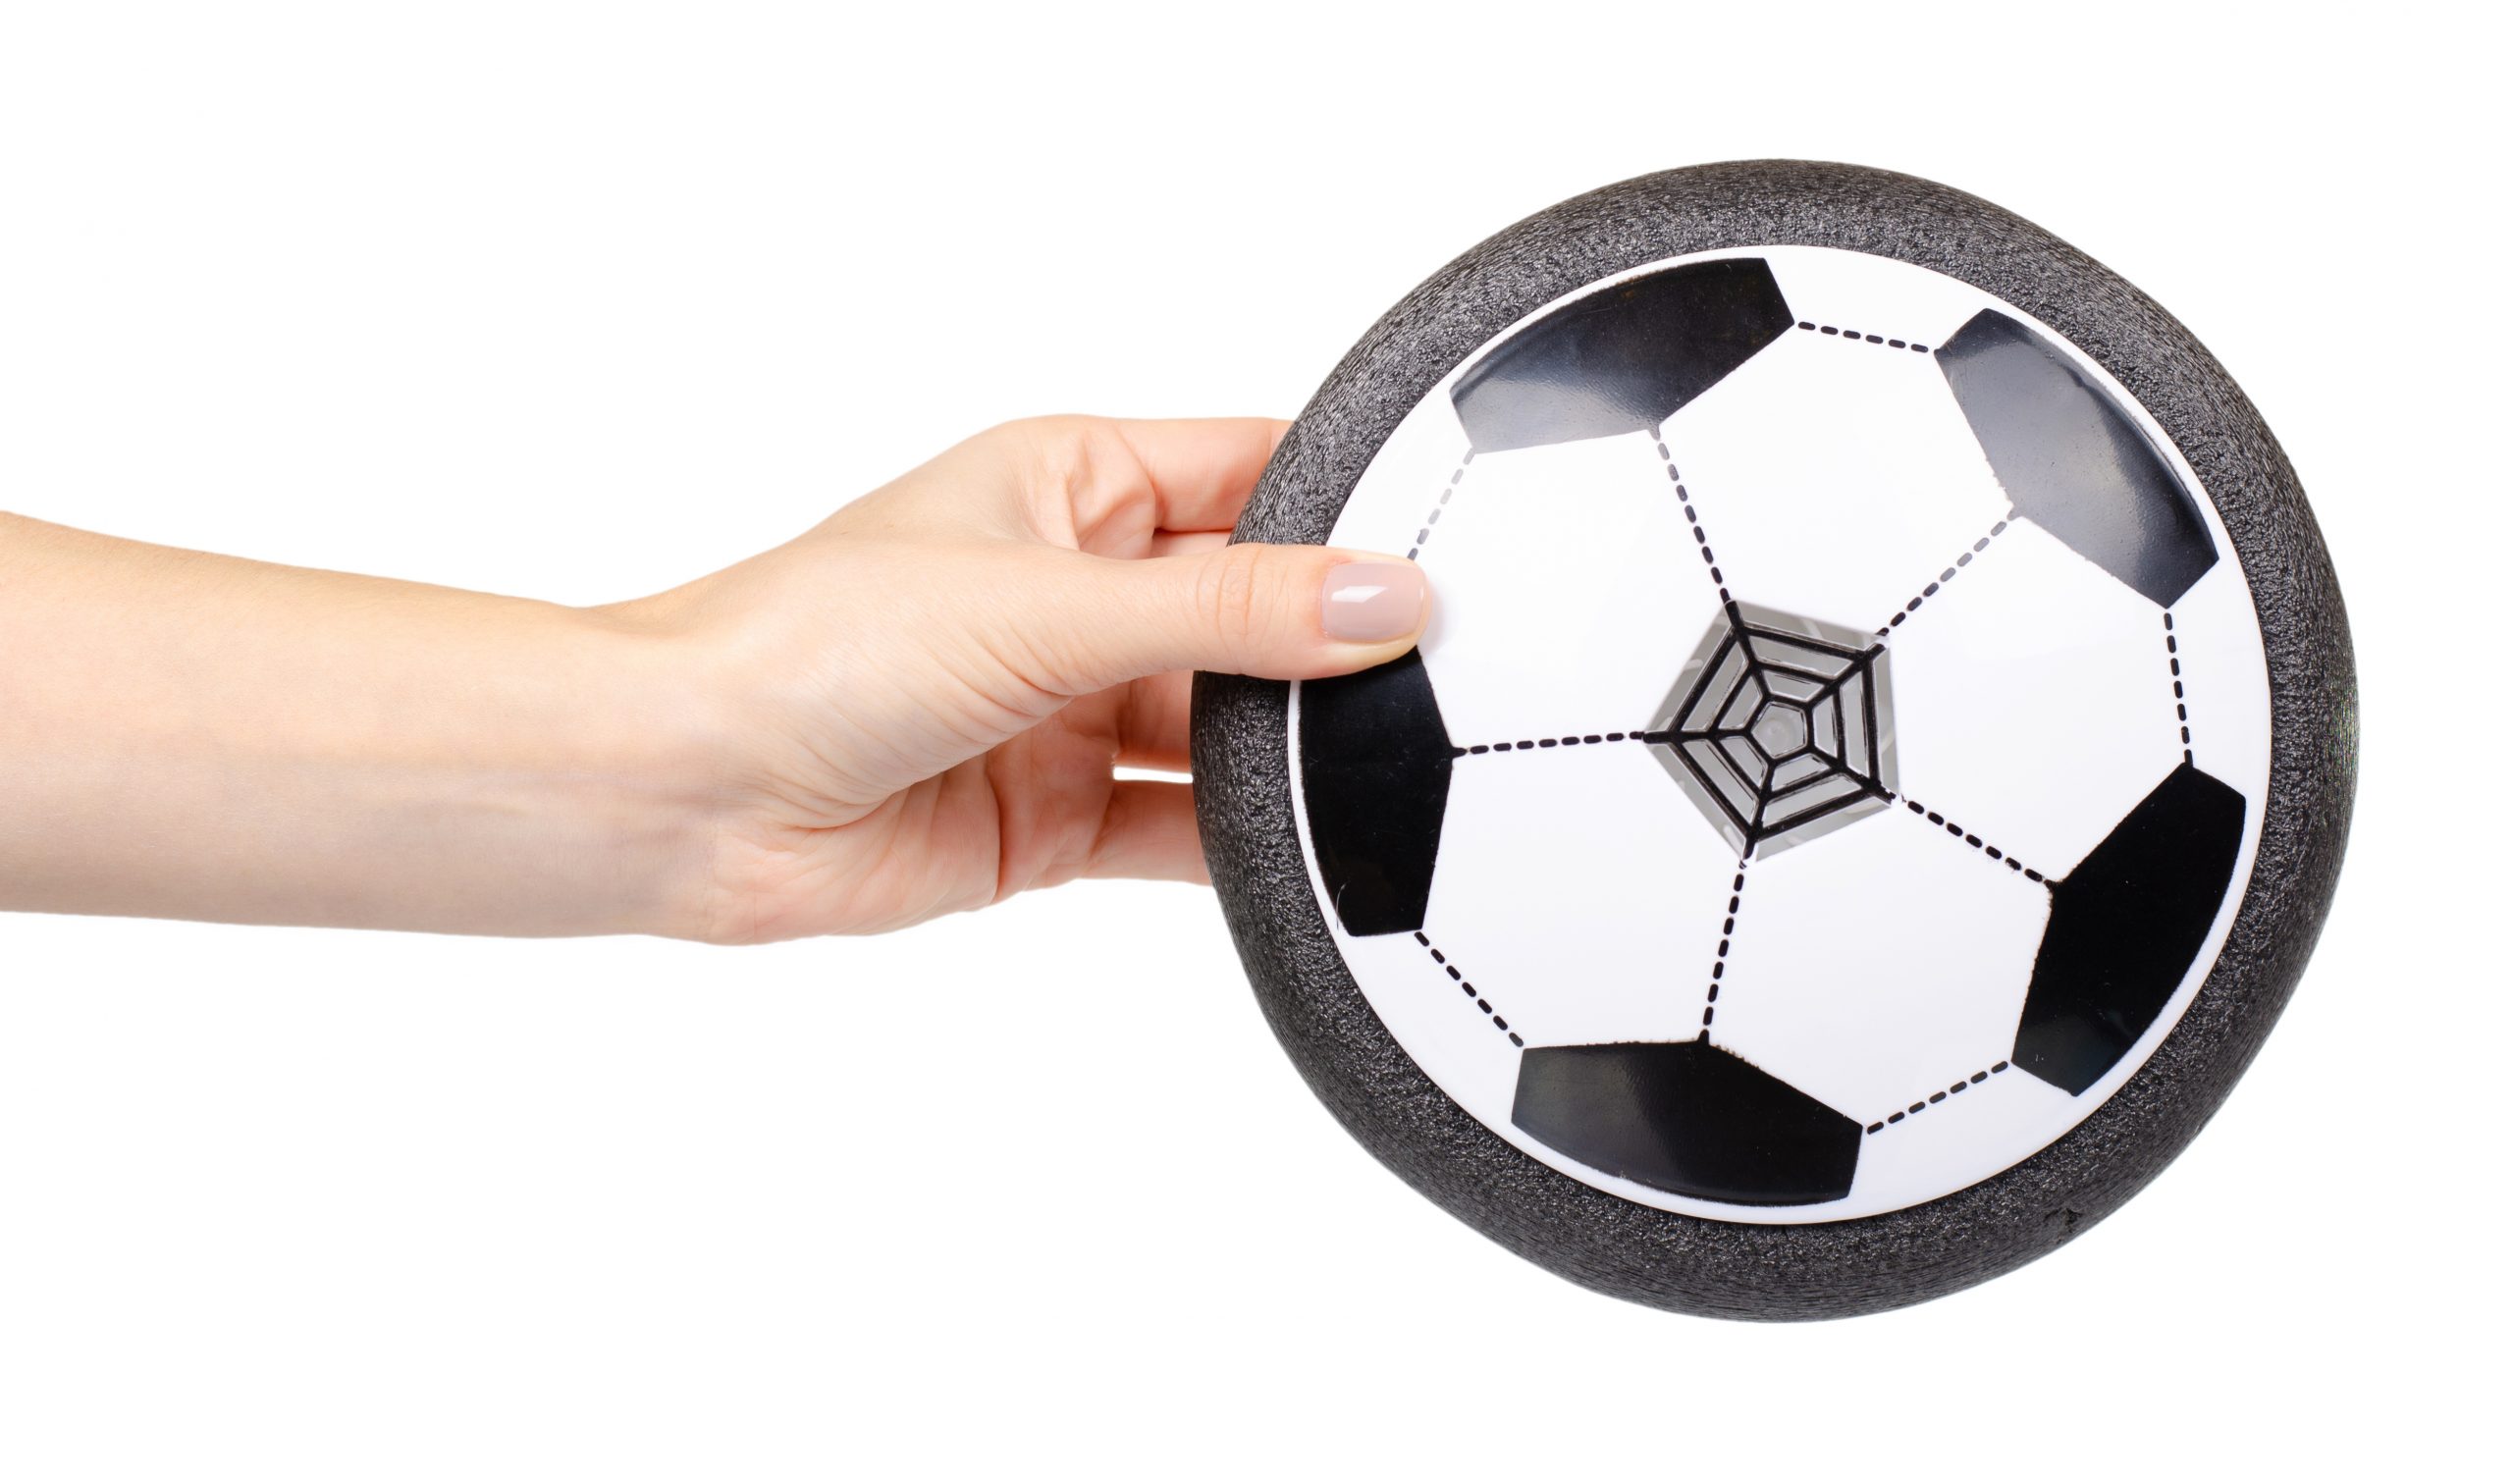 Top 10 Hover Soccer Ball Toys for Kids by @TechLeads - Listium